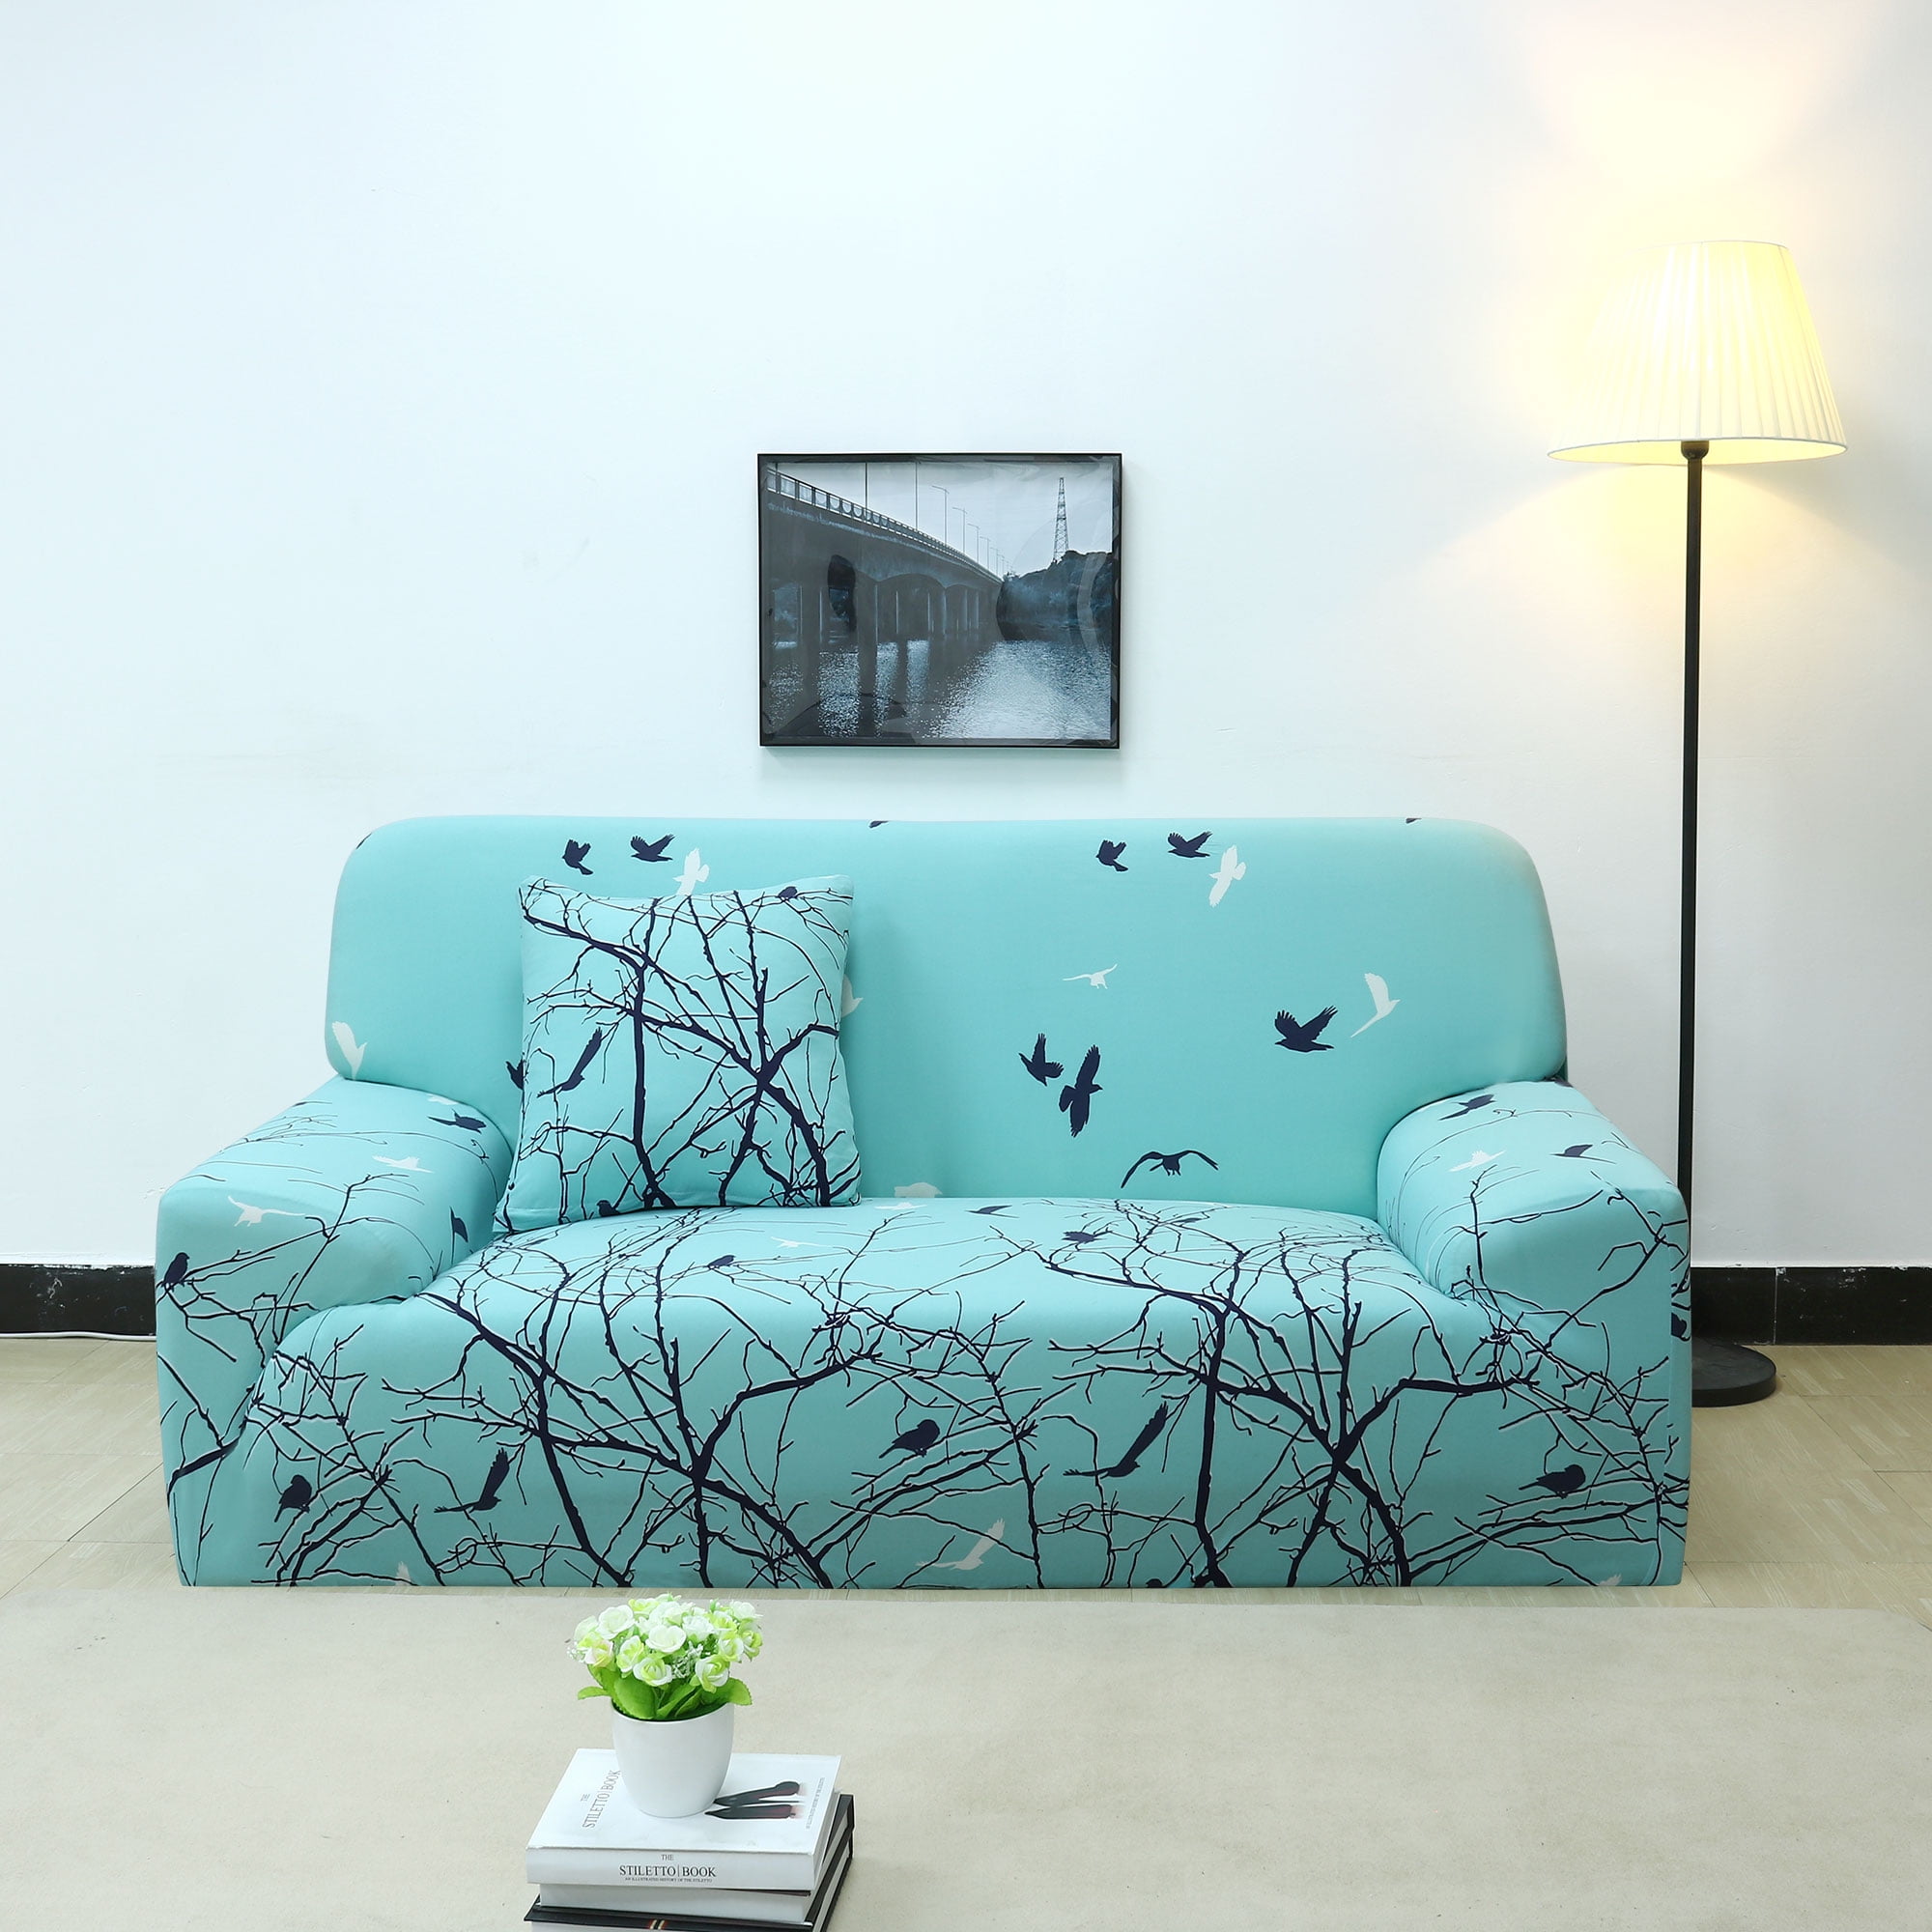 Leaves, 3 Seater 185cm-230cm WONGS BEDDING Leaves Printed Sofa Cover for 3 Seater 1-Piece Soft Polyester with Elastic Bottom Couch Slipcover Universal Fitted Sofa Slipcover Furniture Protector